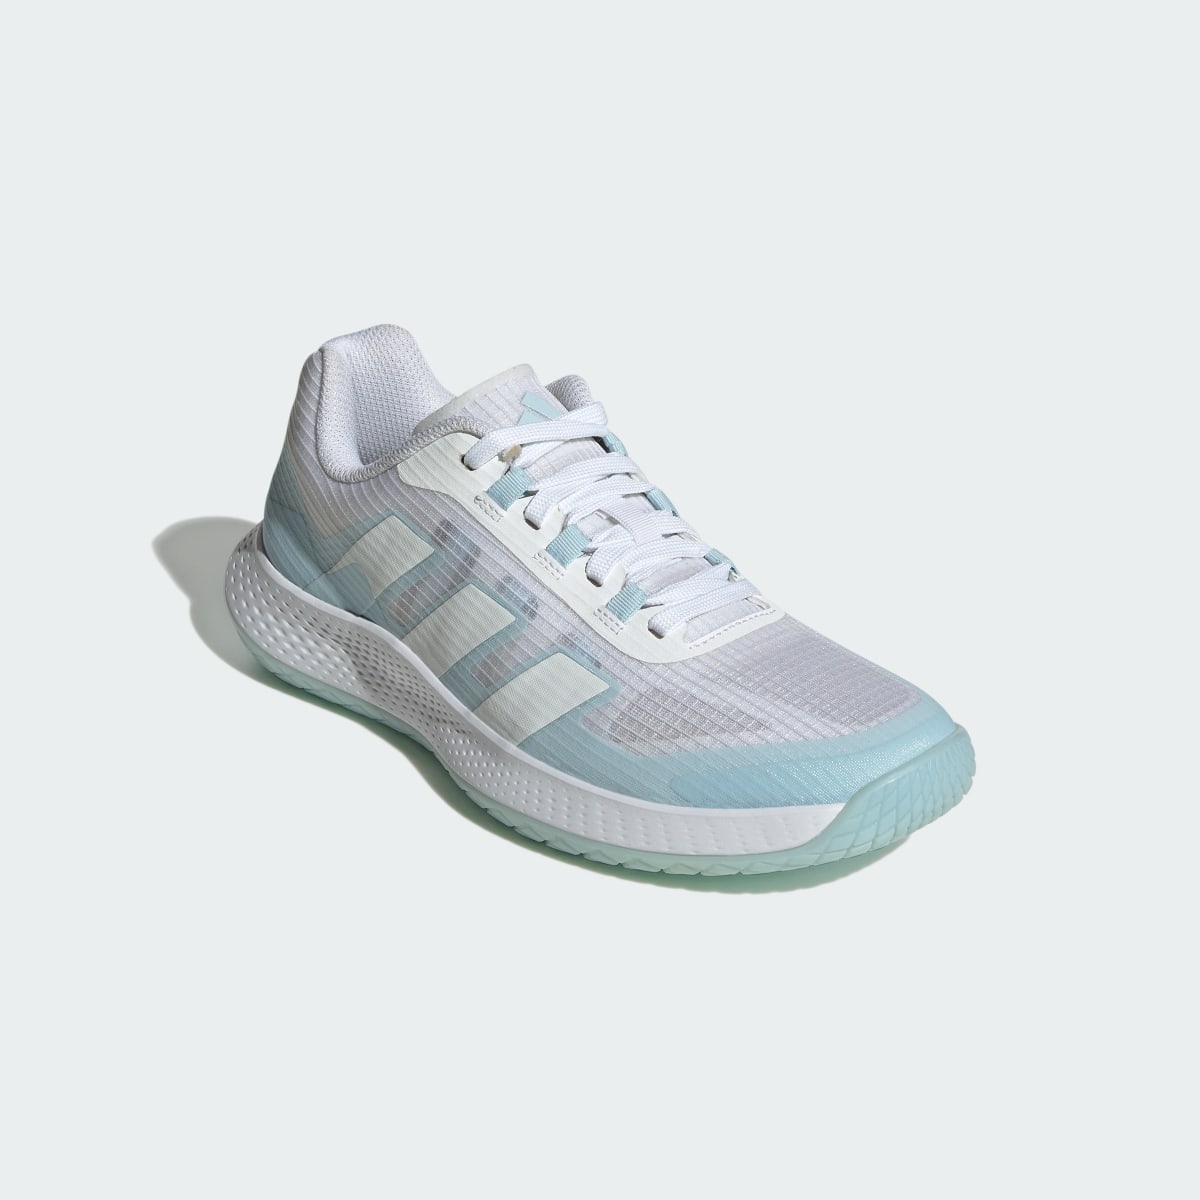 Adidas Forcebounce Volleyball Schuh. 5